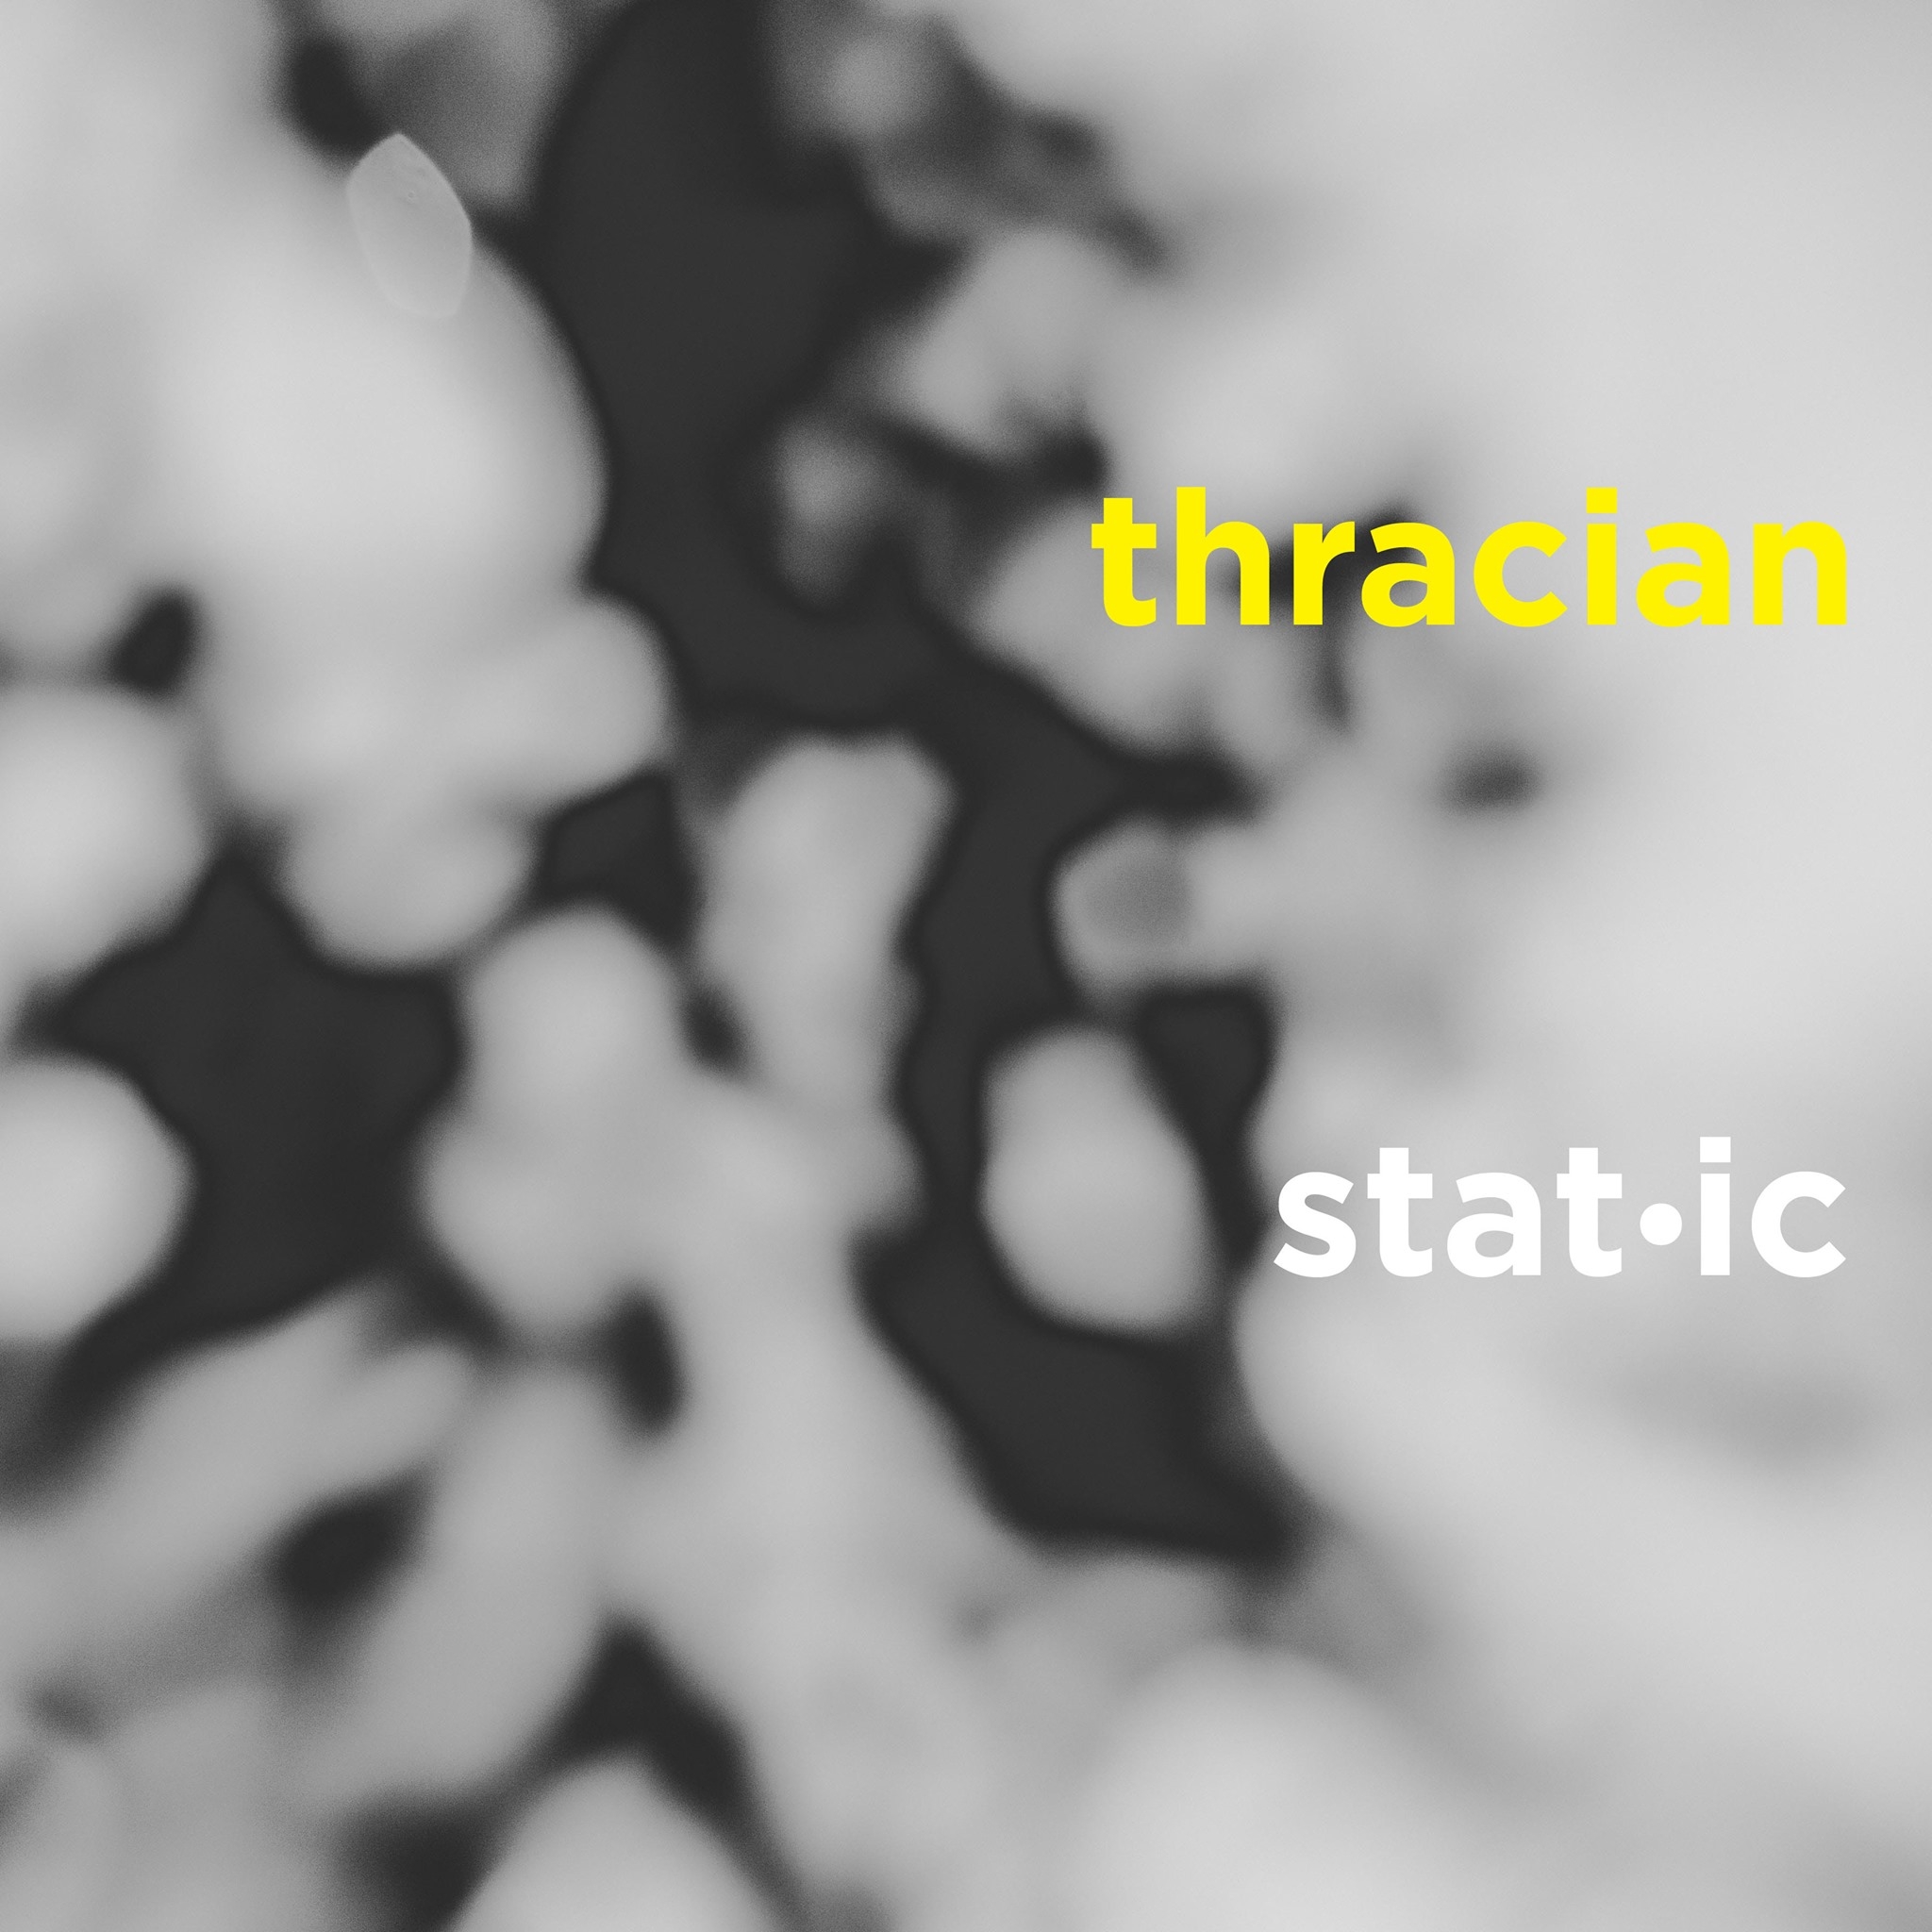 Art by Mark Gleason for "Thracian" by Stat·ic.